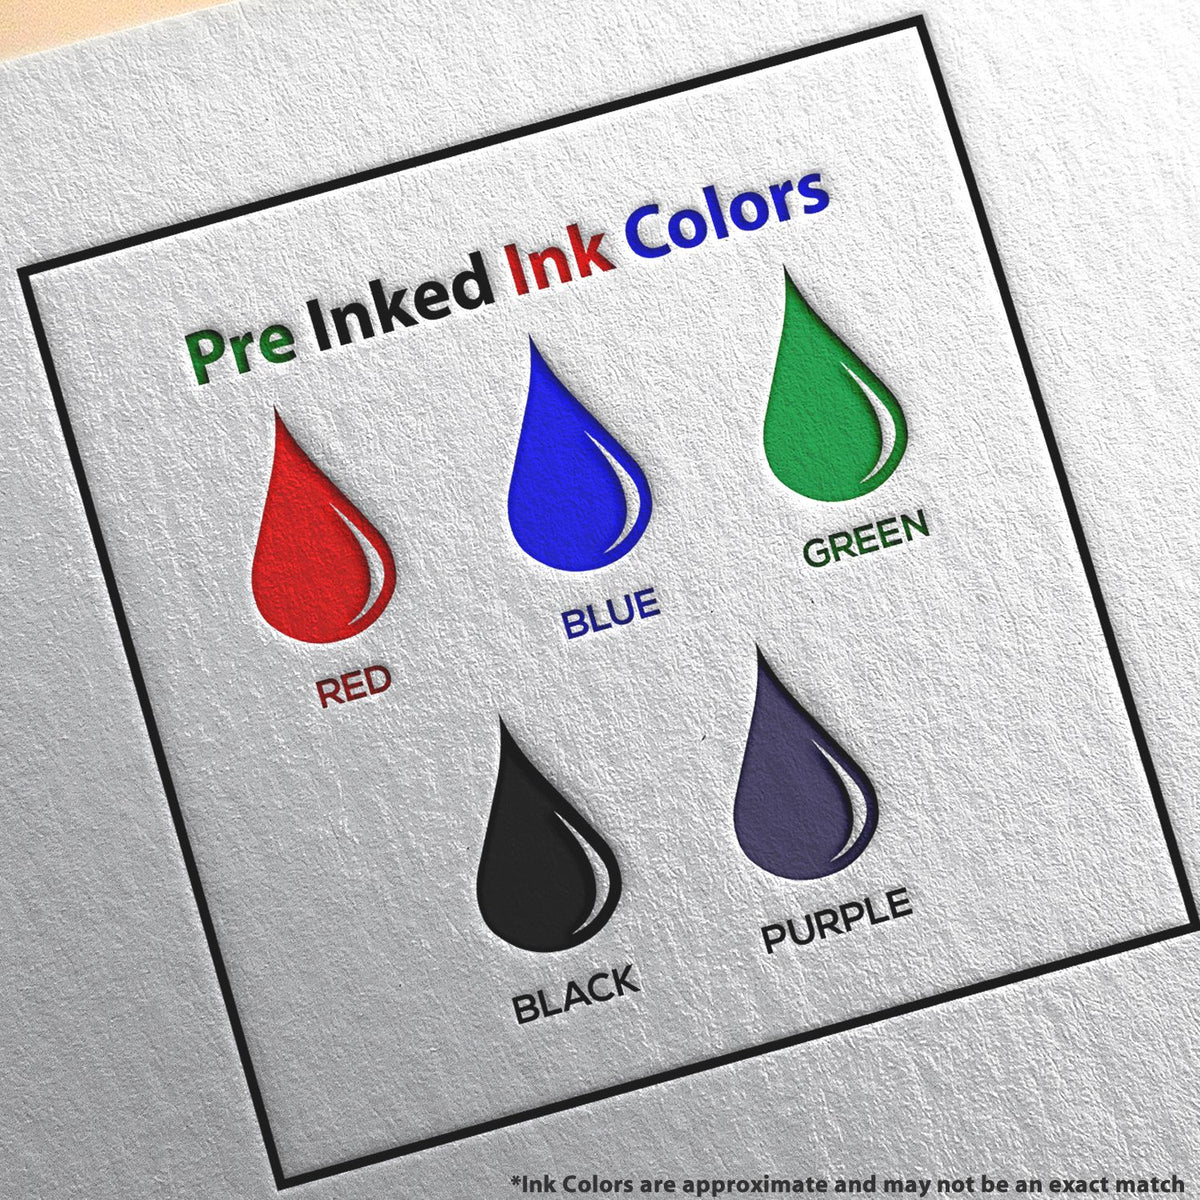 A picture showing the different ink colors or hues available for the Super Slim Arkansas Notary Public Stamp product.